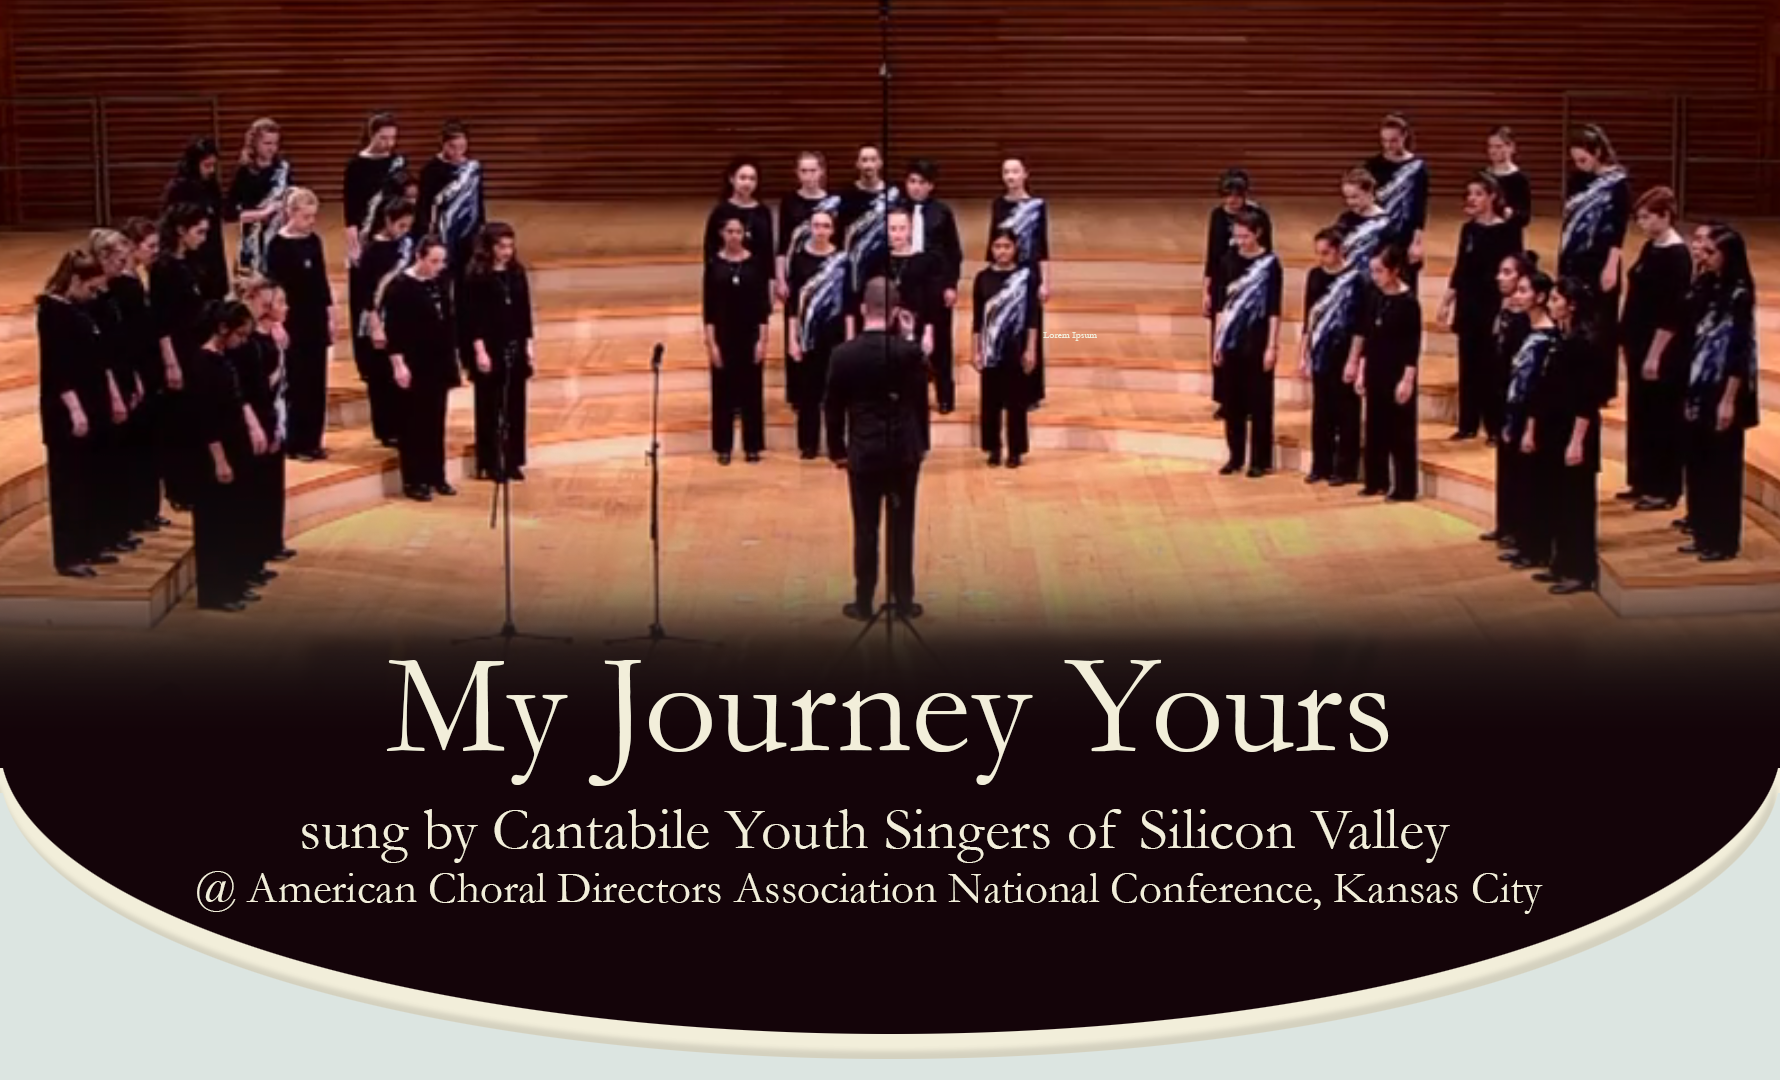 My Journey Yours sung by Cantabile Youth Singers of Silicon Valley